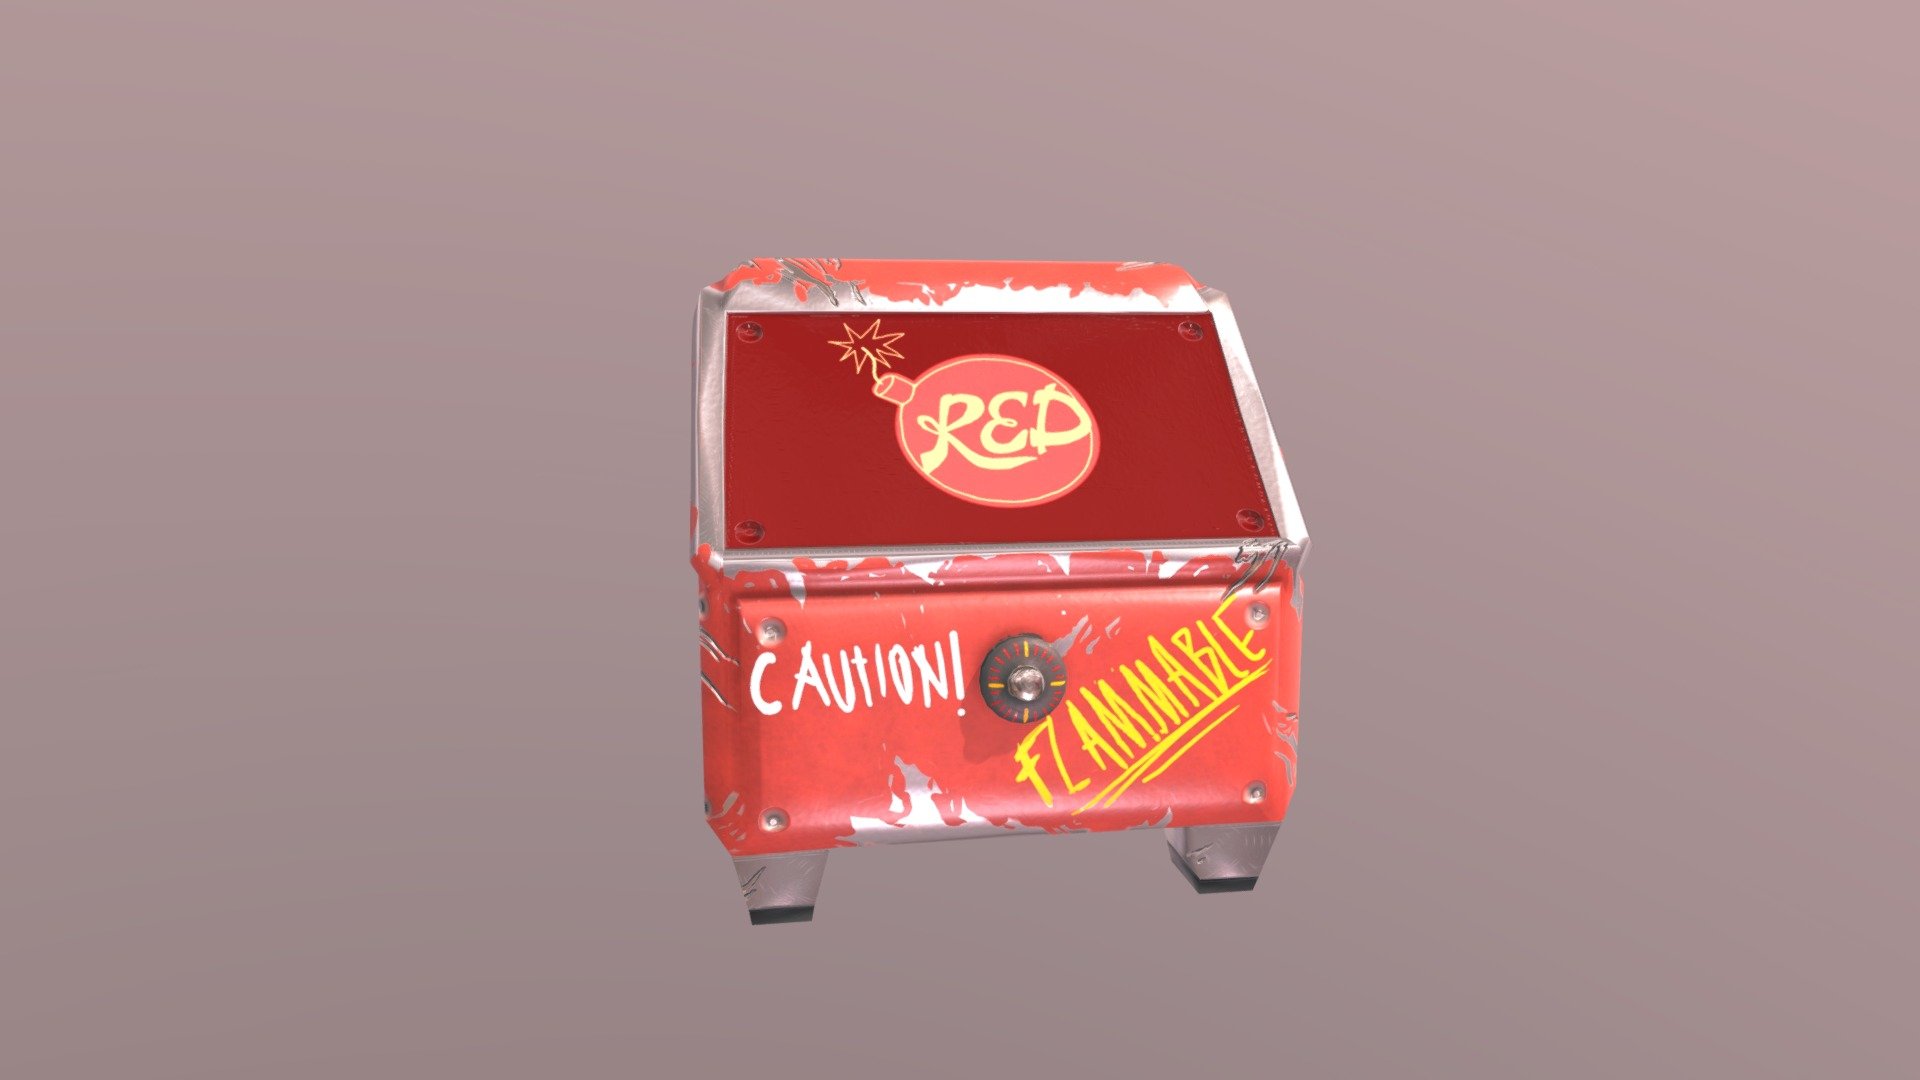 Team fortress 2 Pyro's "hot" lootbox